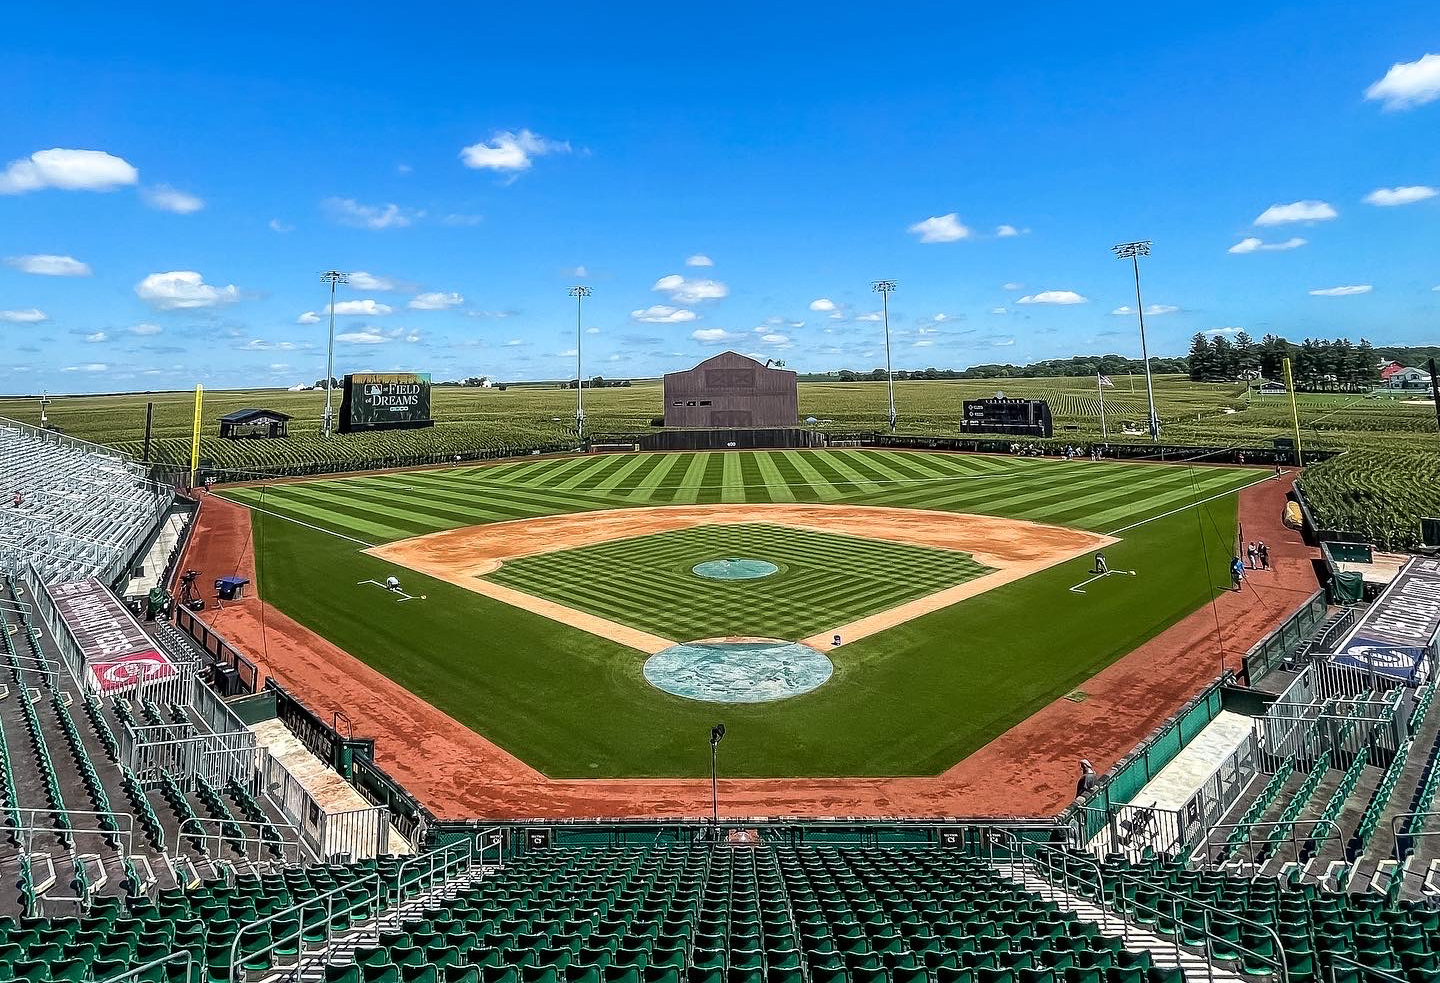 MLB at Field of Dreams: Everything to know about the 2022 game